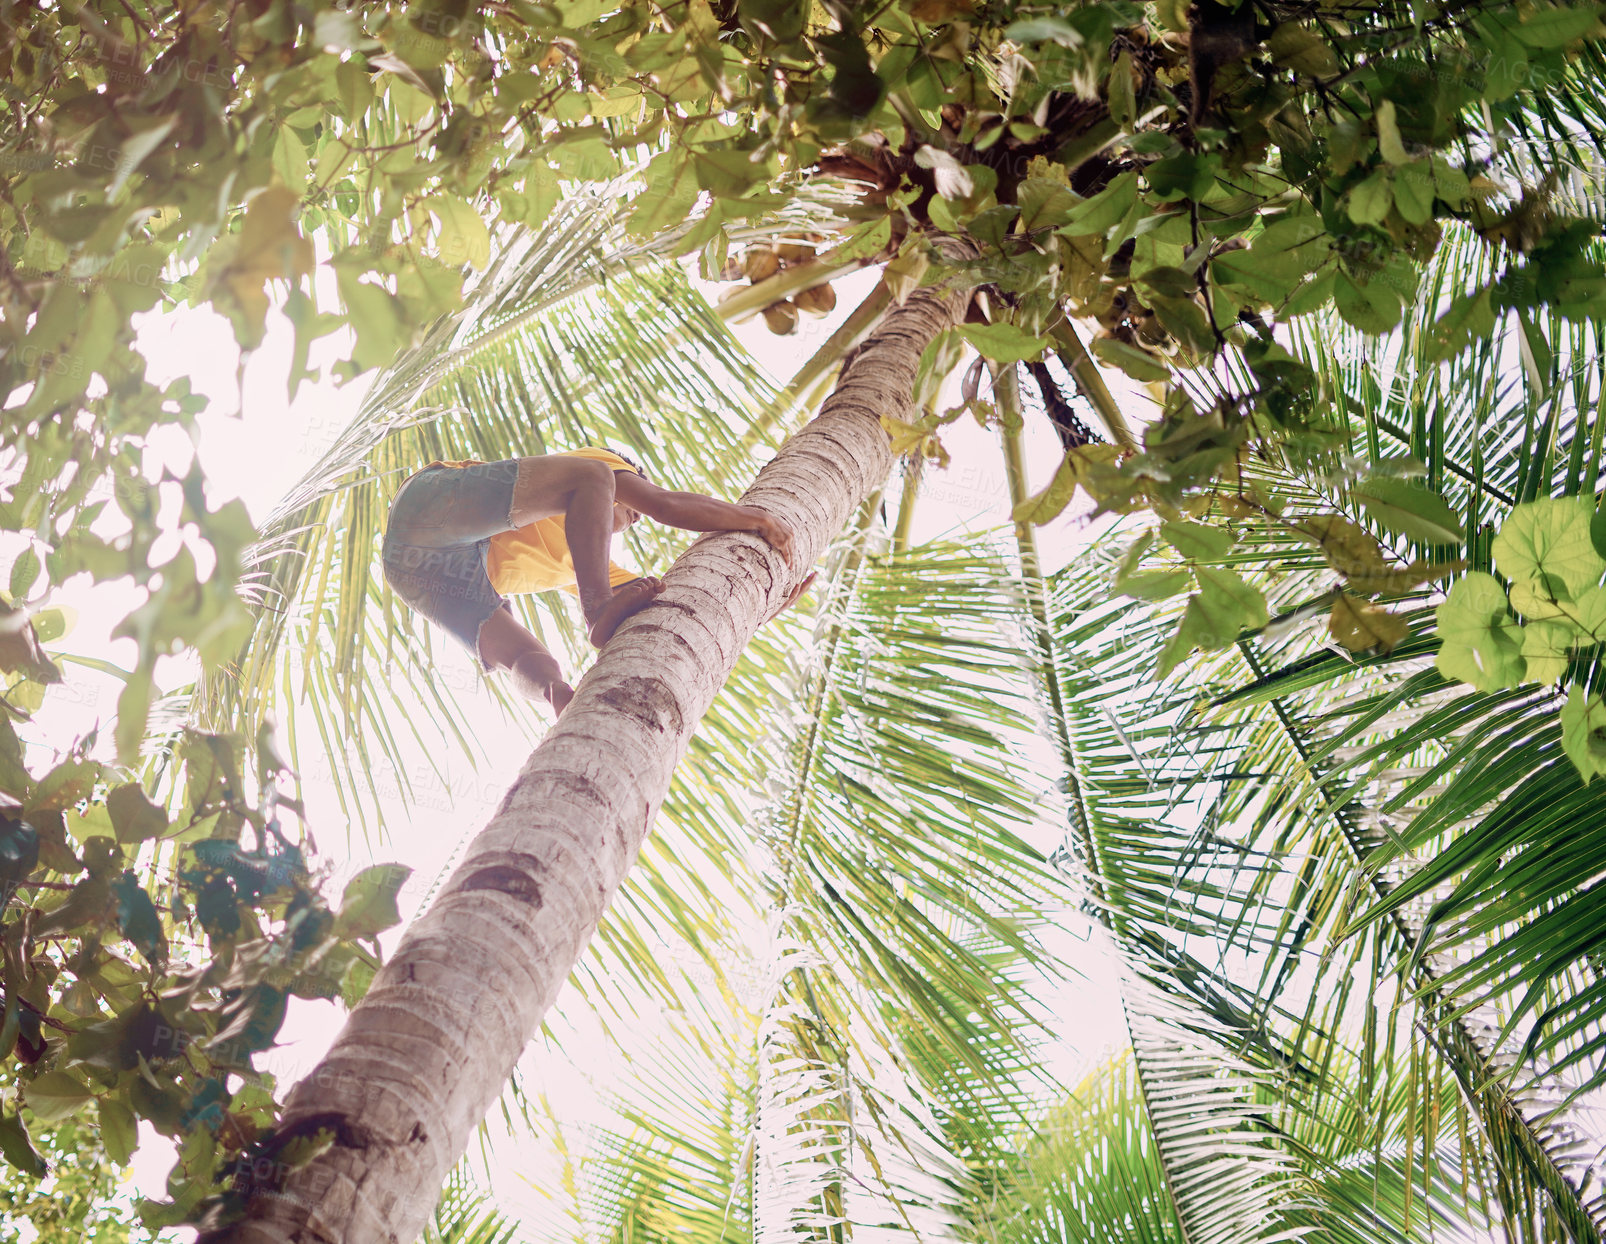 Buy stock photo Low angle shot of a young man climbing up a coconut palm tree in Raja Ampat, Indonesia